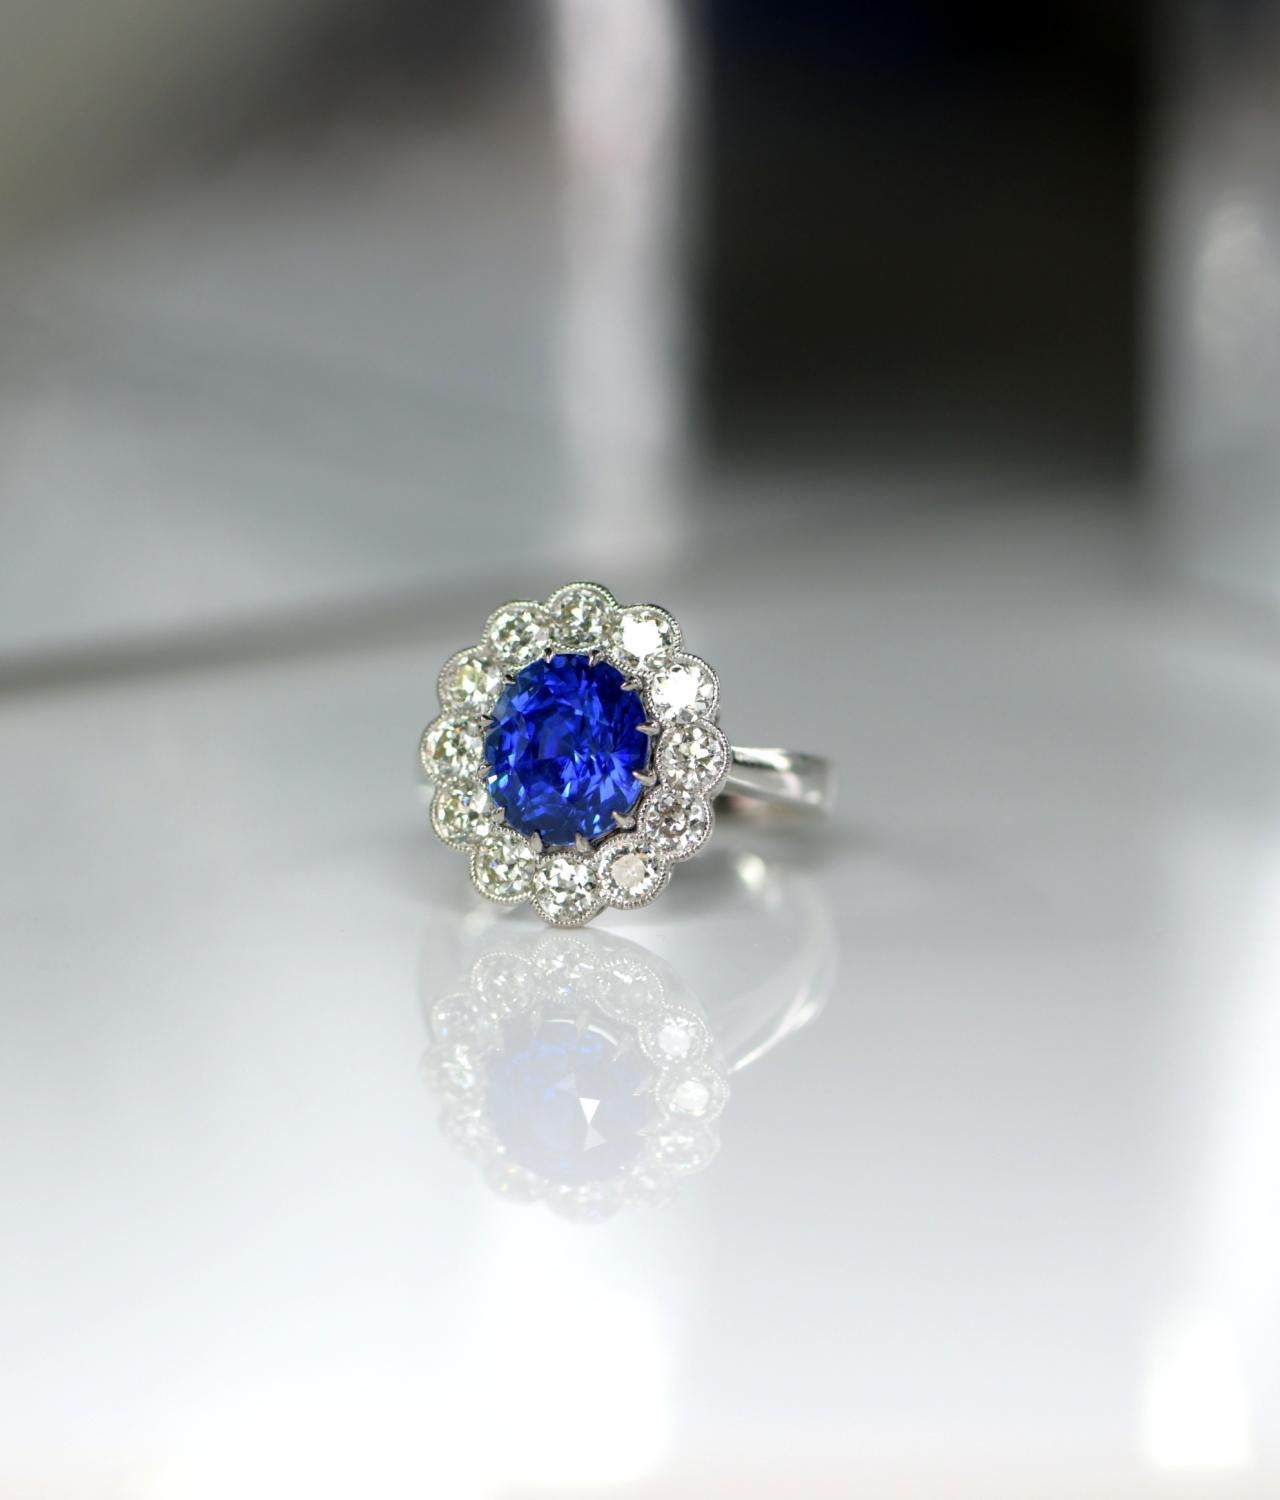 This sapphire is top quality royal blue colour. It has an extraordinary fire that will always catch the eye. This amazing stone is set in the centre of a timeless classic cluster design. The surrounding diamonds are also bright and have good fire.